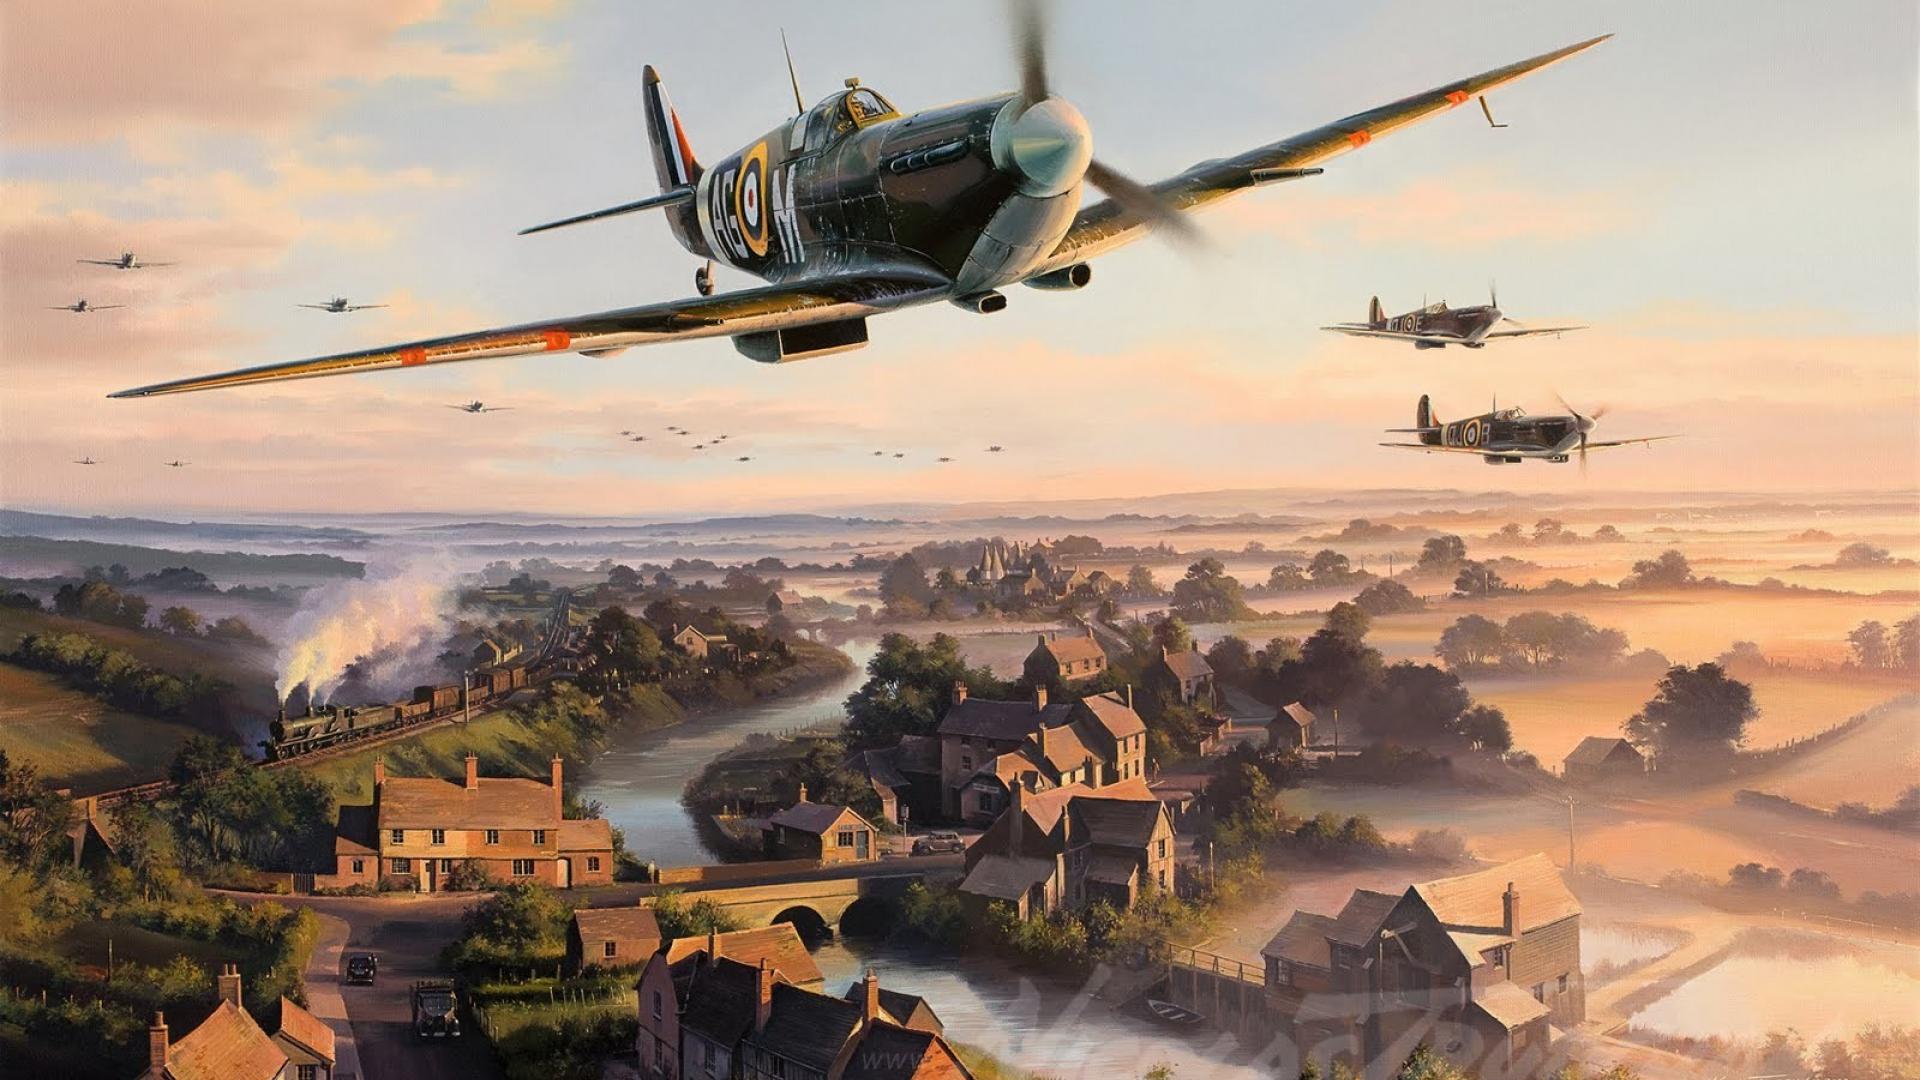 Free download World war ii artwork wallpaper 17870 [1920x1080] for your